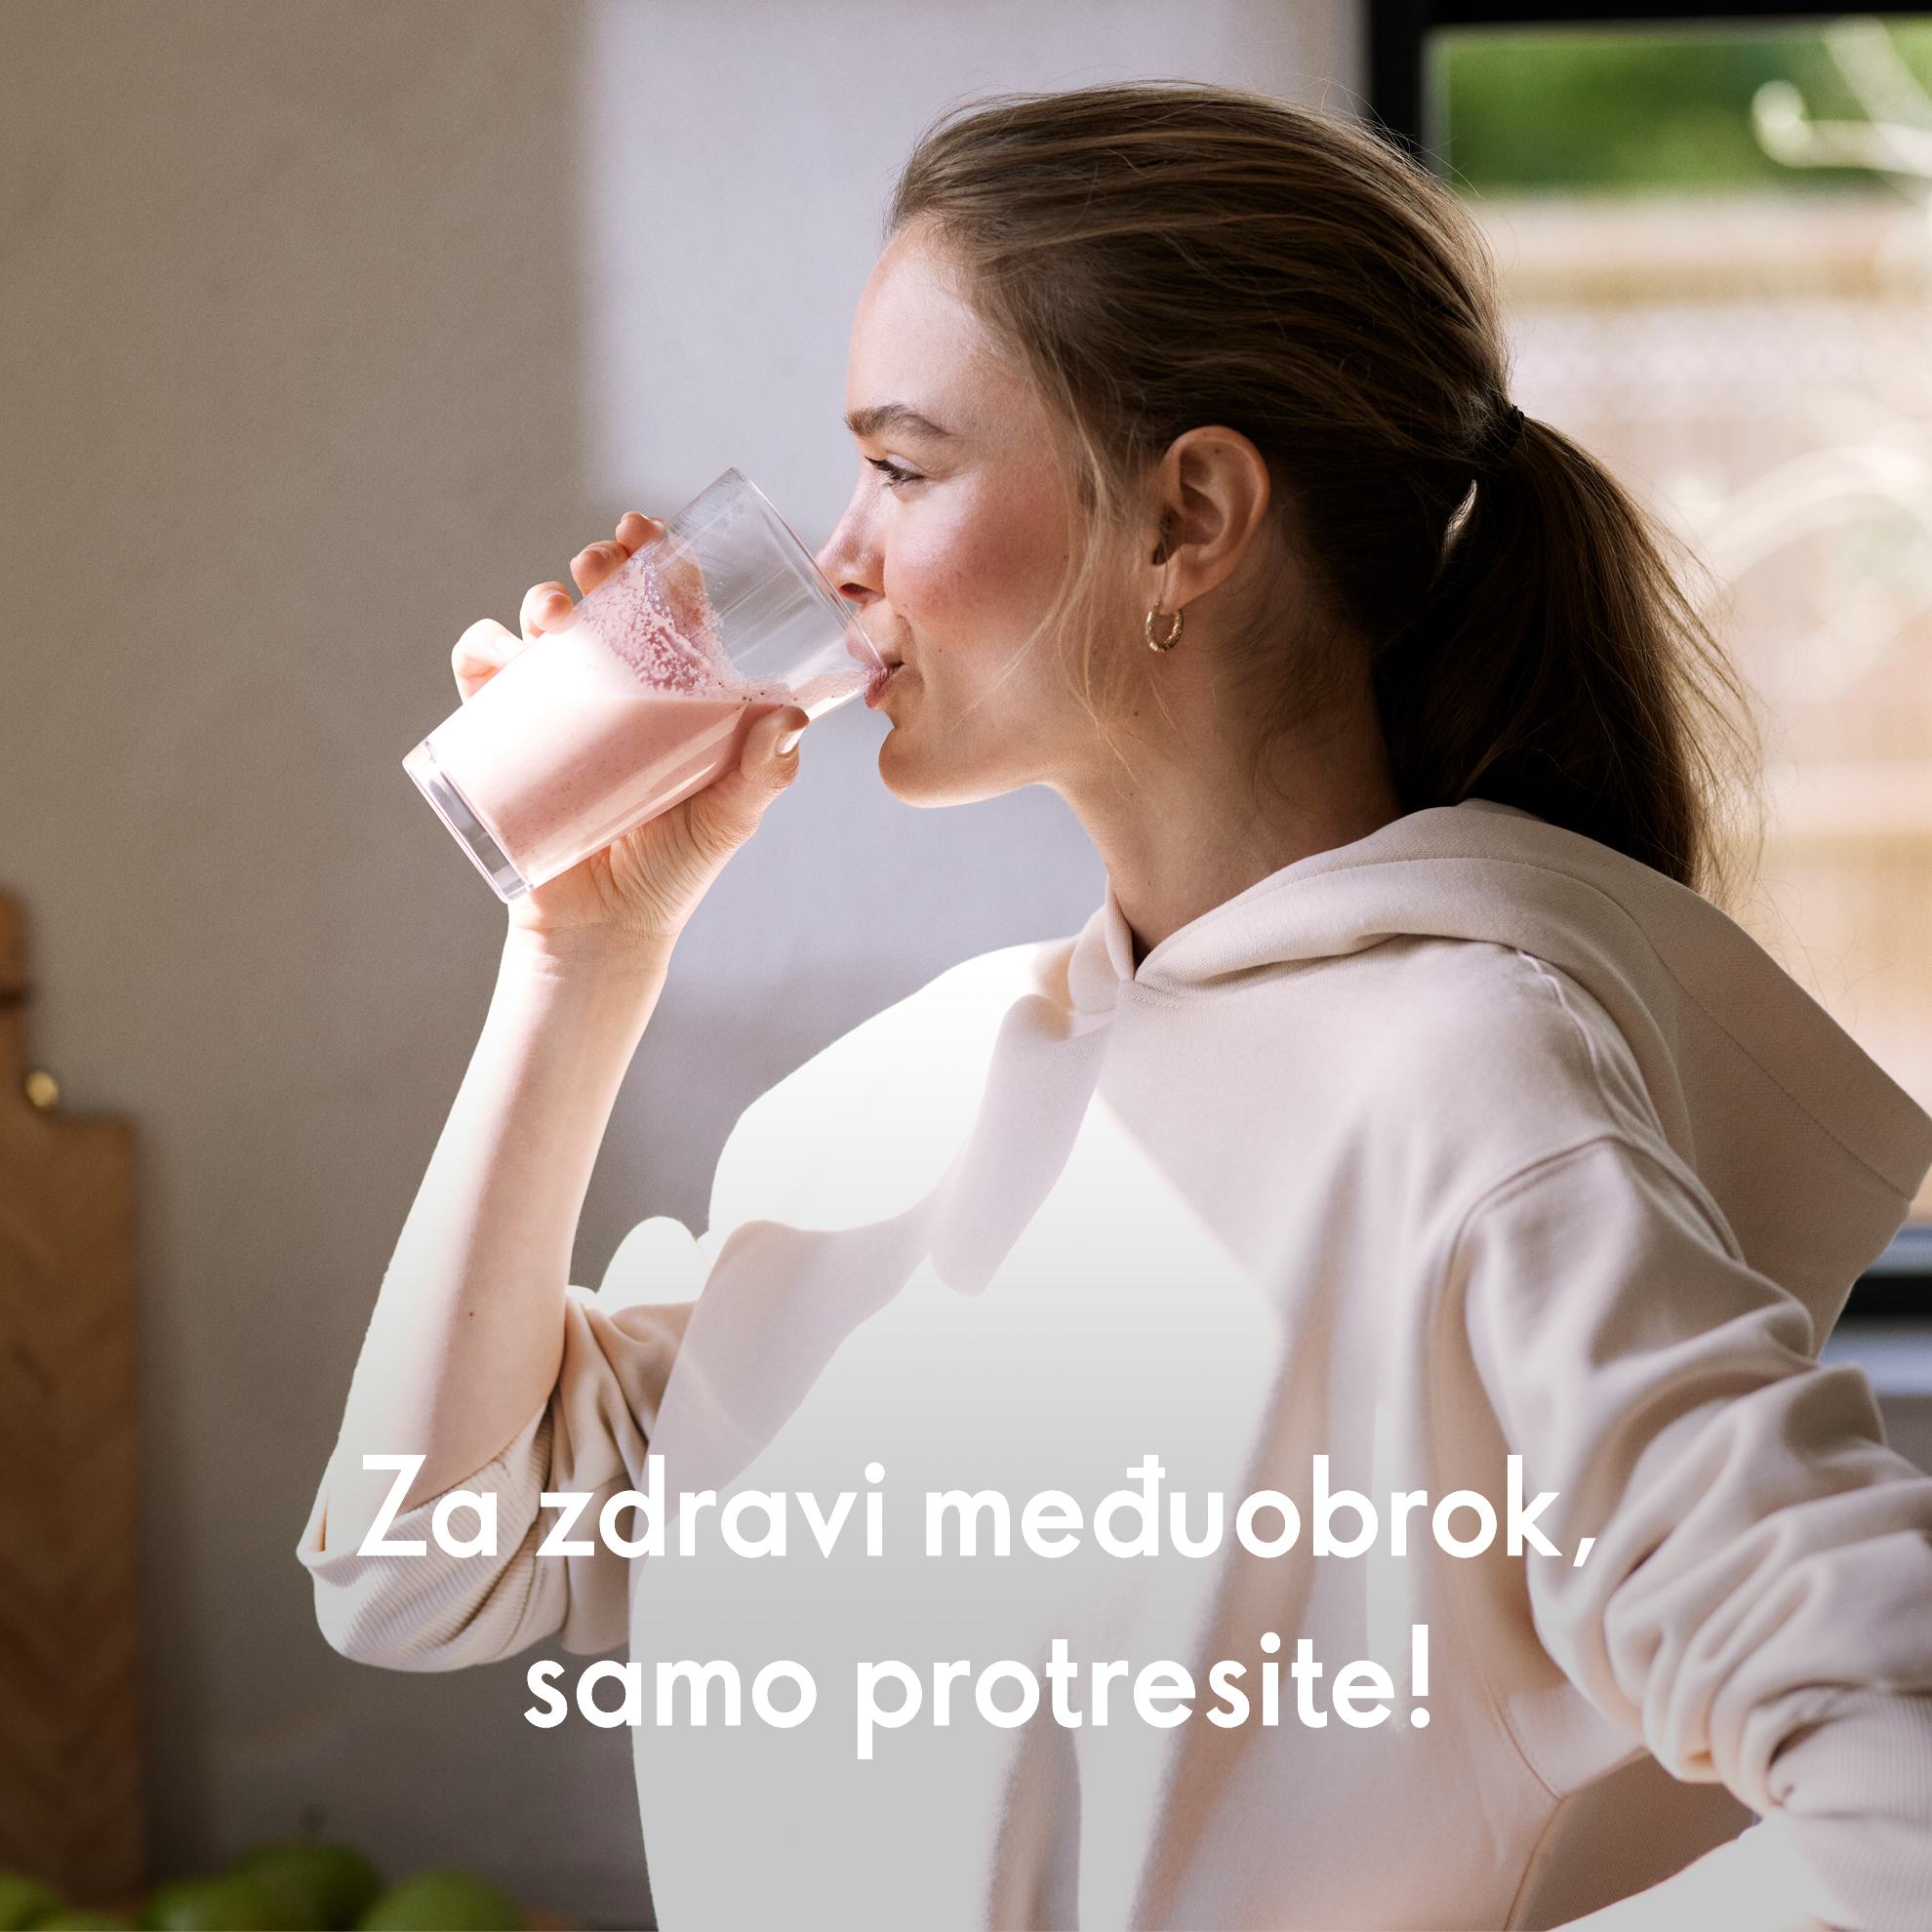 https://media-cdn.oriflame.com/productImage?externalMediaId=product-management-media%2fProducts%2f37285%2fRS%2f37285_4.png&id=18314711&version=1